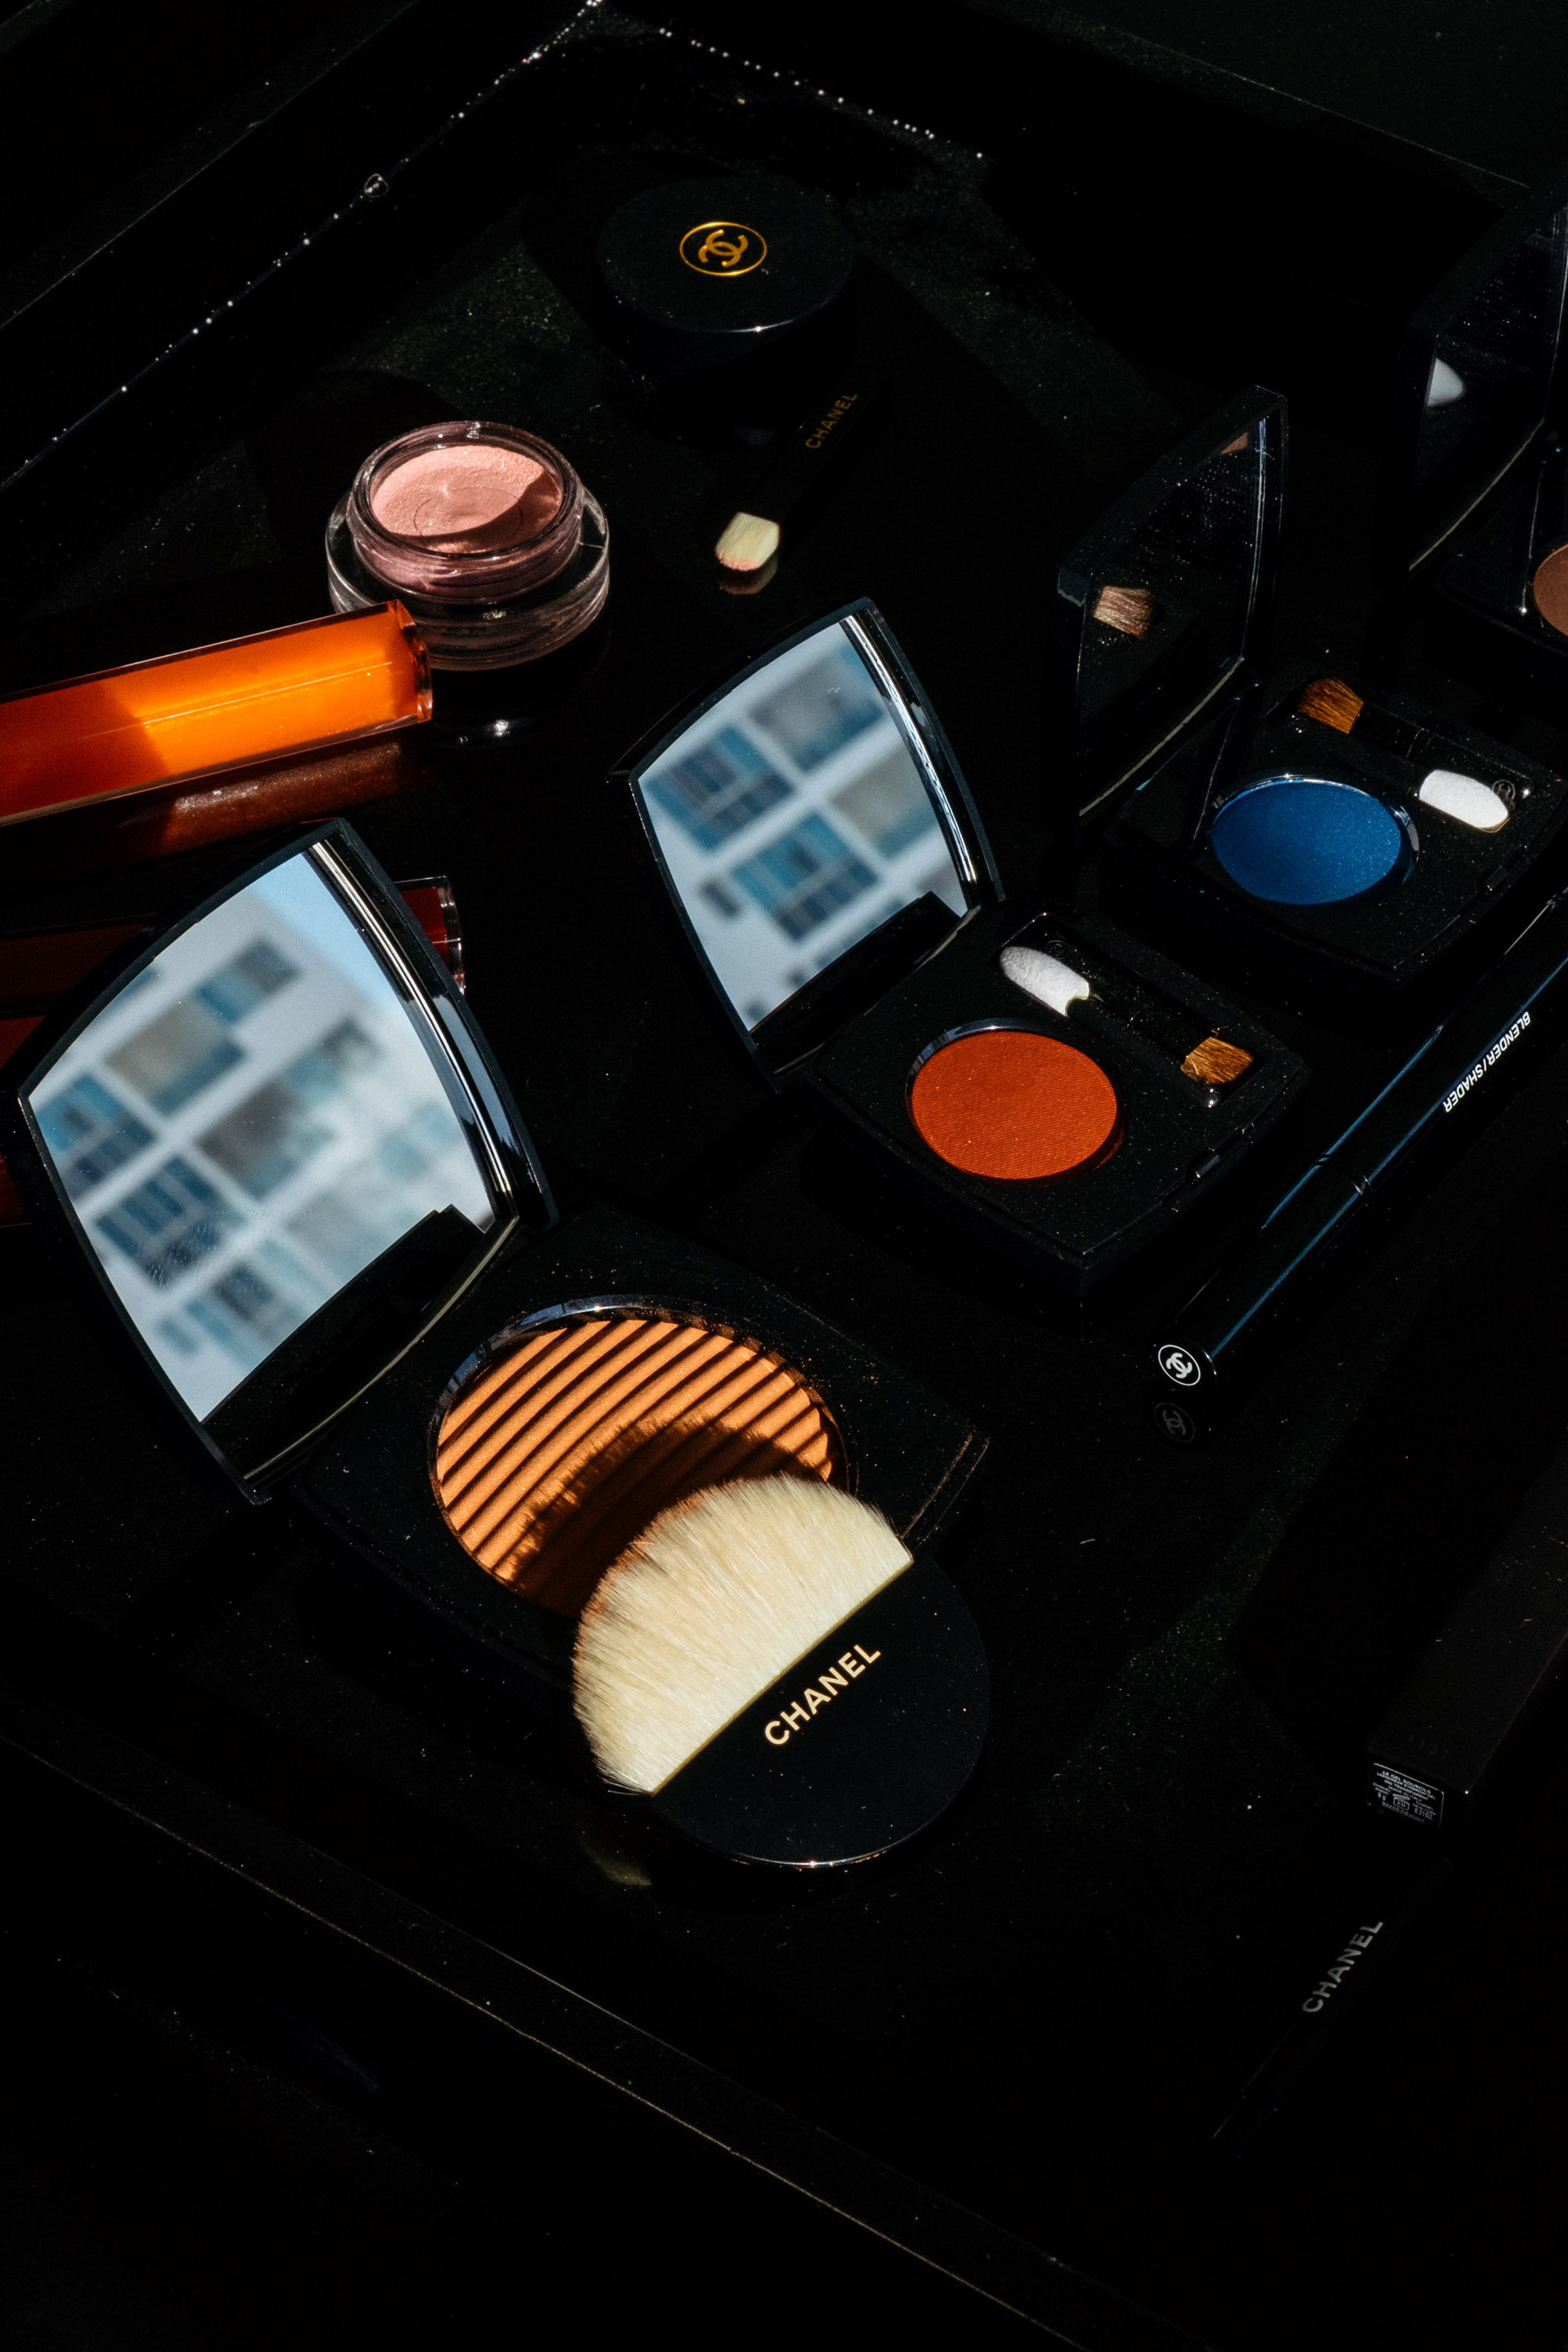 Lucia Pica's latest creations for Chanel Beauty